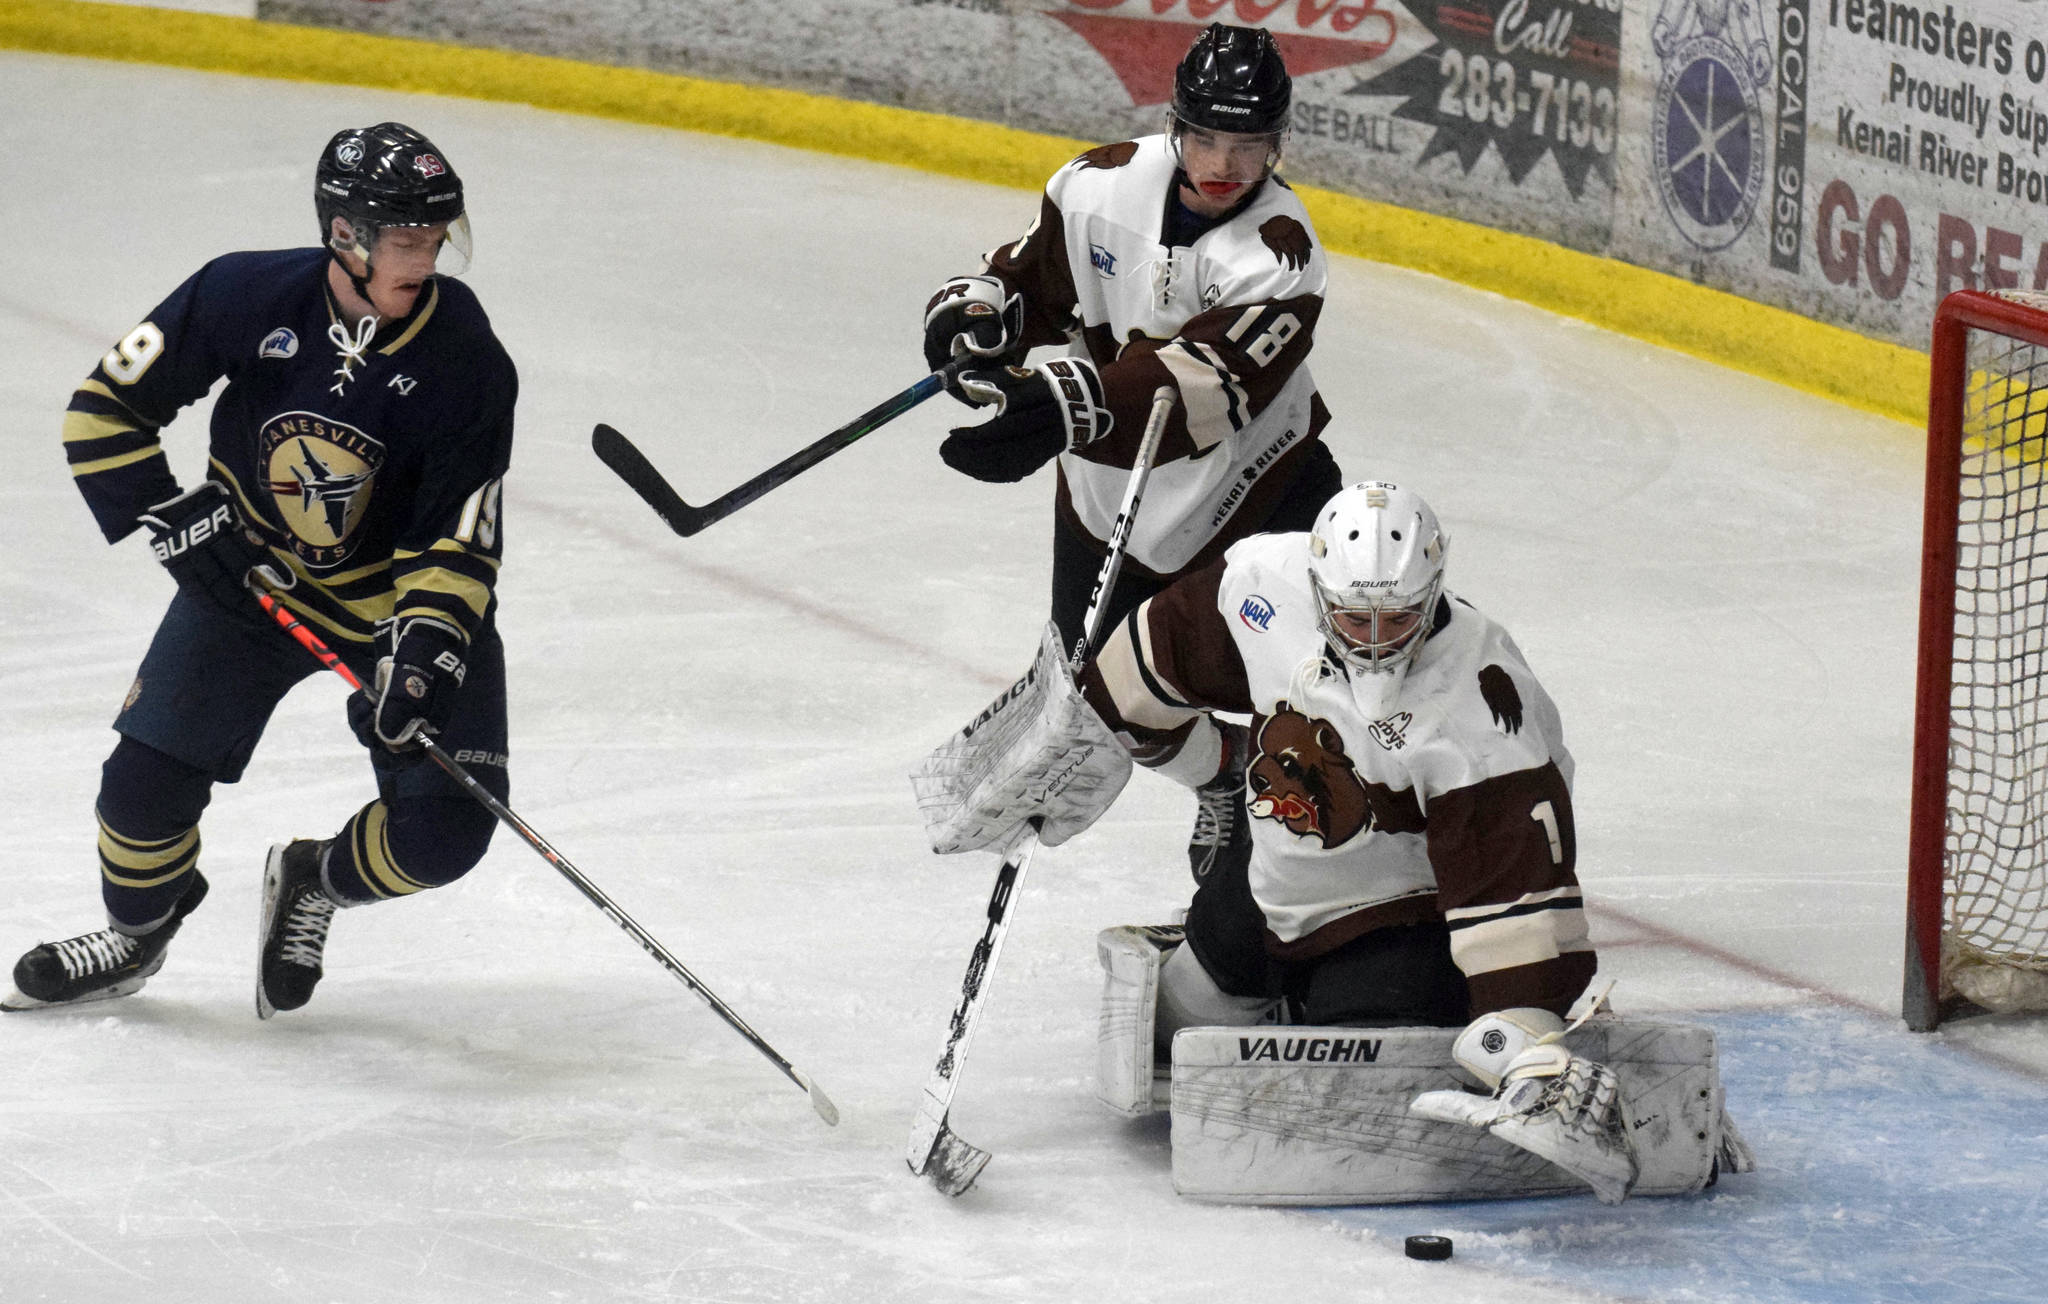 Kenai River Brown Bears goalie Luke Pavicich covers up the puck in front of Shane Ott of the Janesville (Wisconsin) Jets as Brown Bears defenseman Brendan Hill looks on Thursday, April 29, 2021, at the Soldotna Regional Sports Complex in Soldotna, Alaska. (Photo by Jeff Helminiak/Peninsula Clarion)